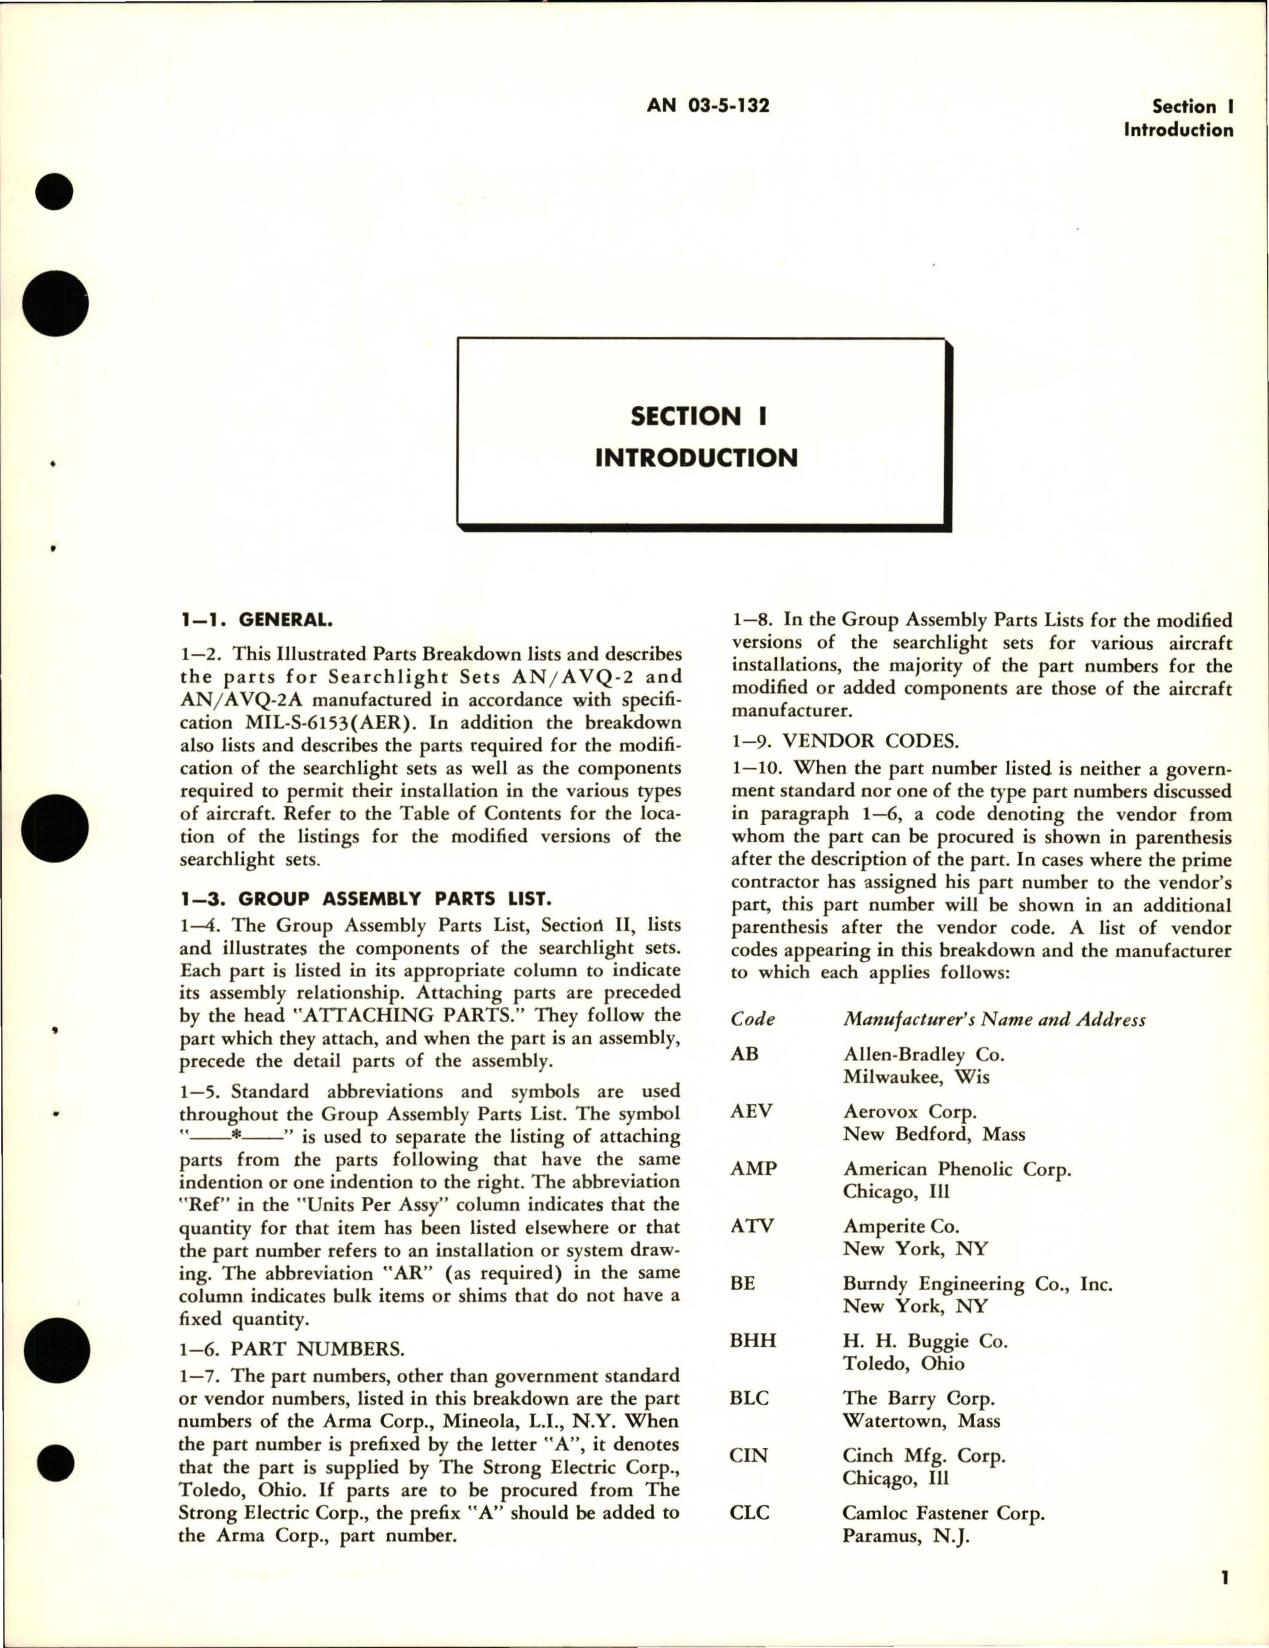 Sample page 5 from AirCorps Library document: Illustrated Parts Breakdown for Searchlight Sets - Installation In Aircraft and Sets Equipped with Obturator Probe - AN-AVQ-2 and AN-AVQ-2A 